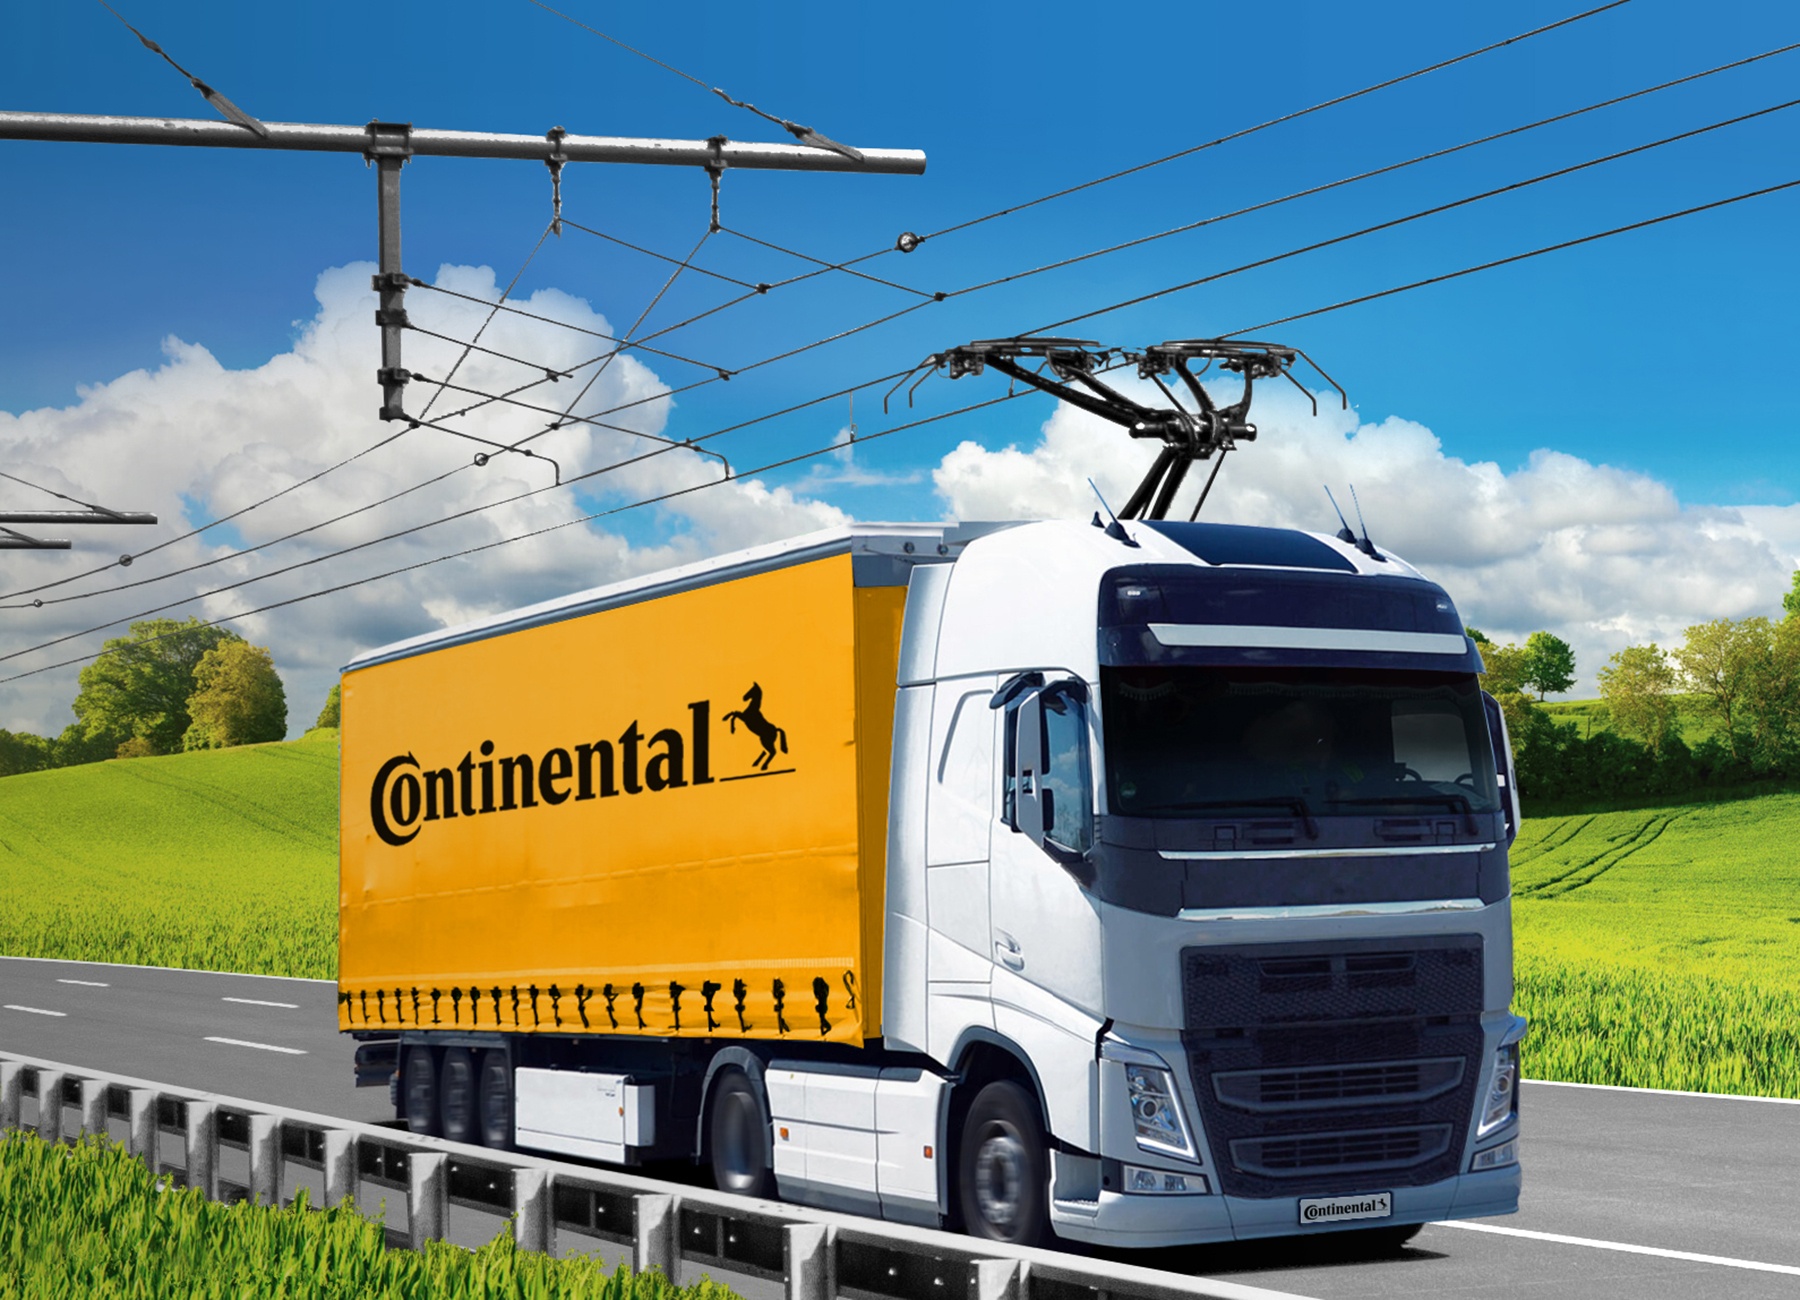 Continental and Siemens Mobility to Supply Trucks Across Europe with Electricity from Overhead Lines